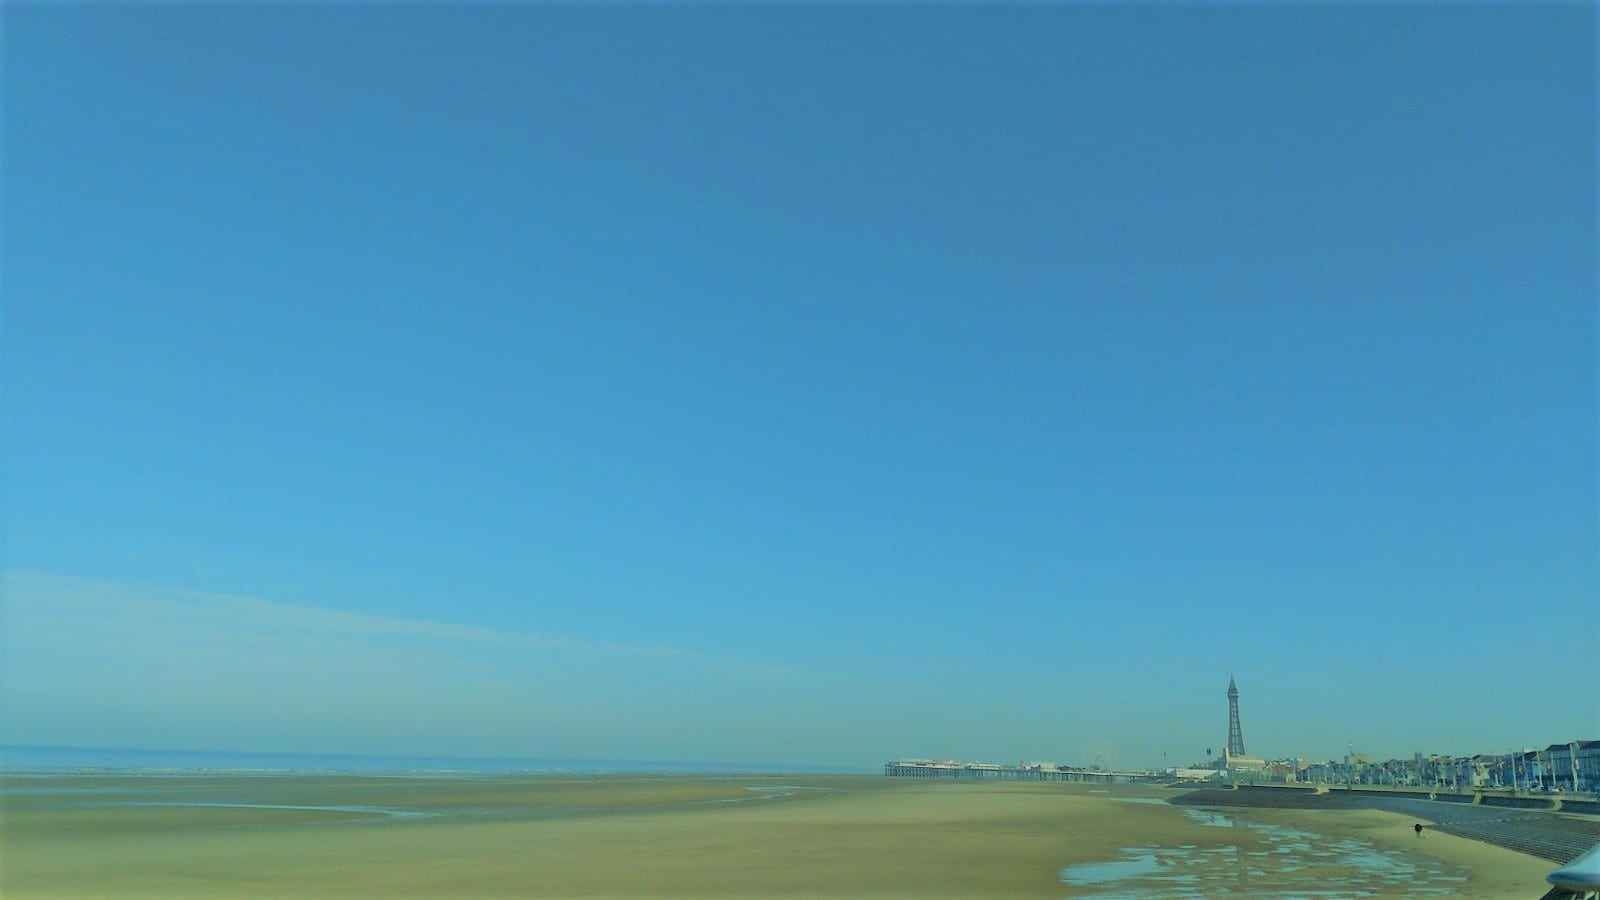 Blackpool View from the Prom by Neil Curtis from Wolverhampton